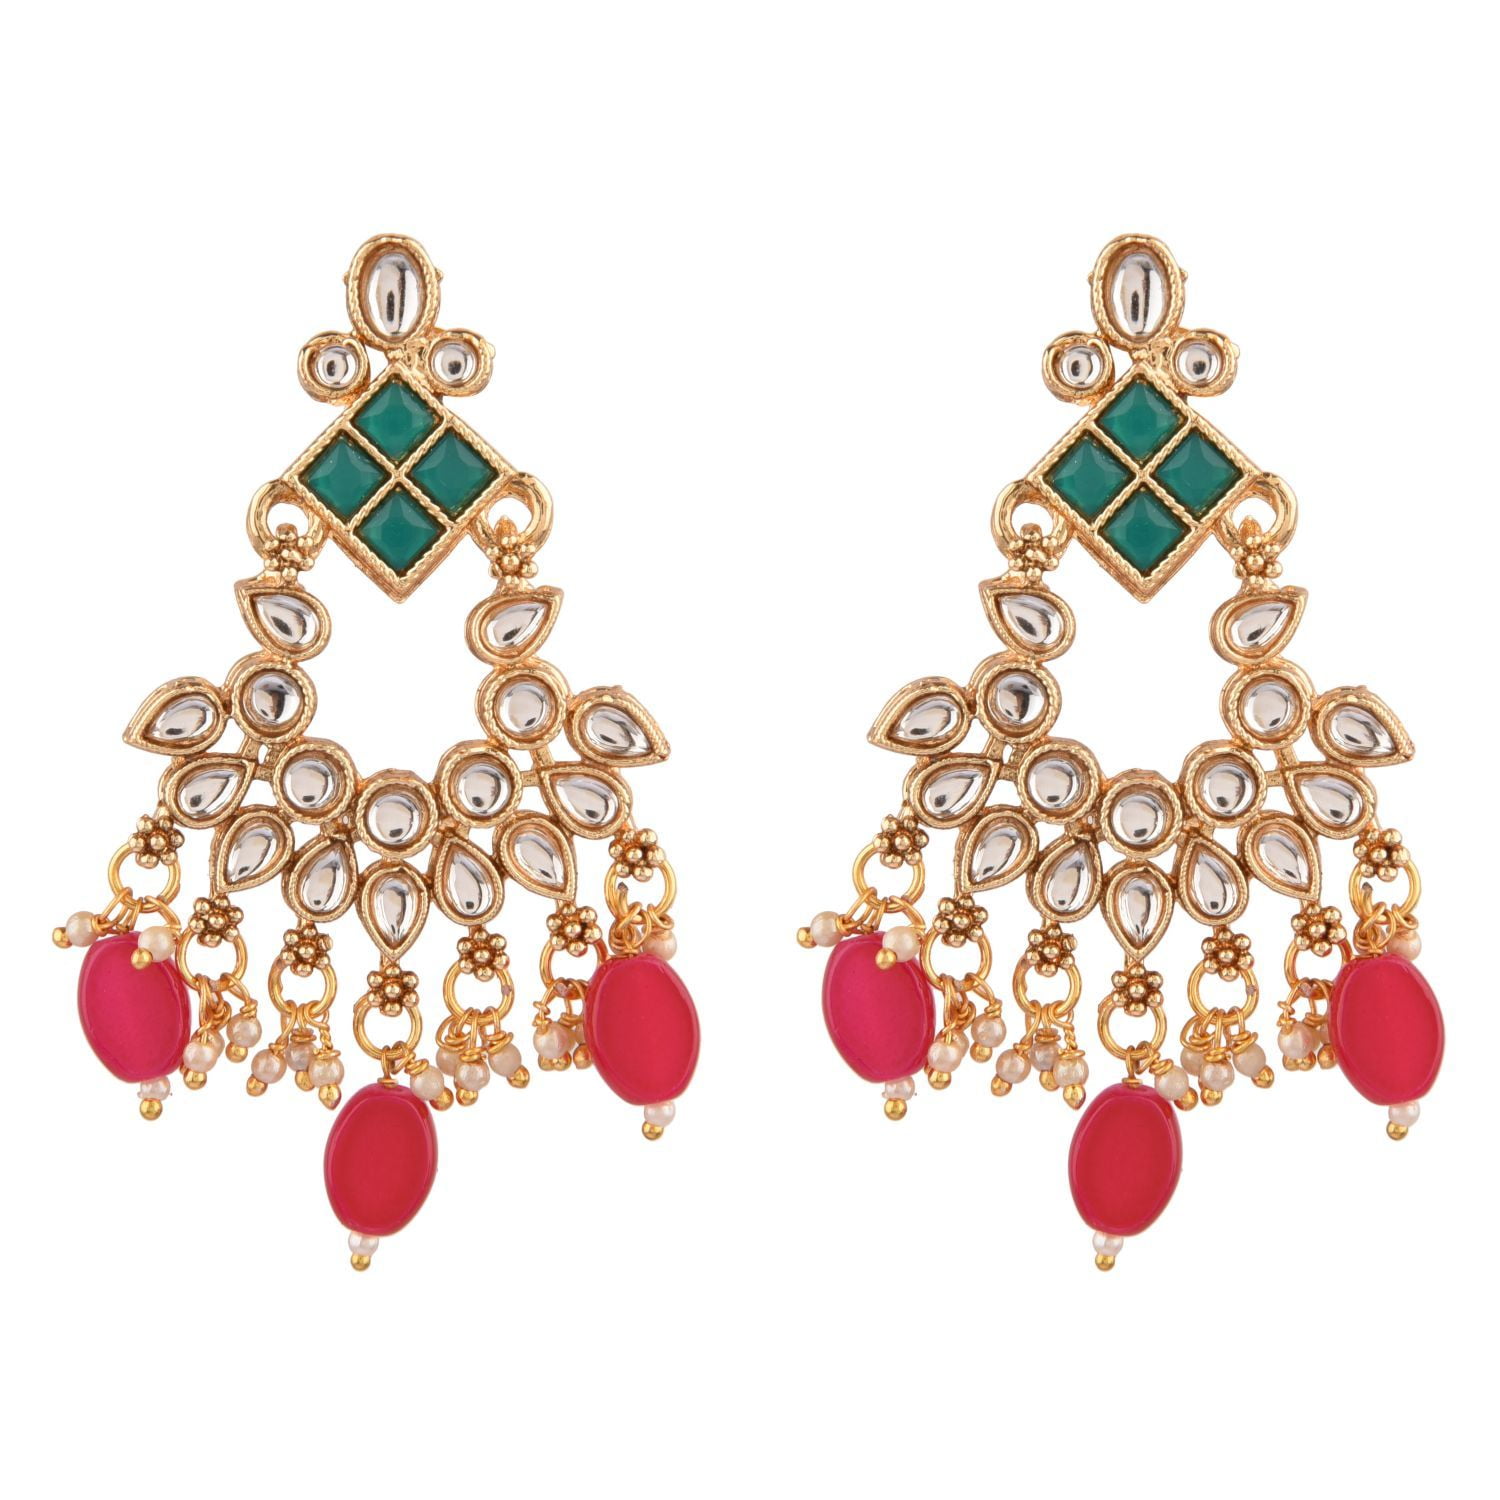 Buy Kundan Chandbali And Pearls Earrings Online Cheap, Jhumka Earrings  Online Shopping, Earrings - Shop From The Latest Collection Of Earrings For  Women & Girls Online. Buy Studs, Ear Cuff, Drop &